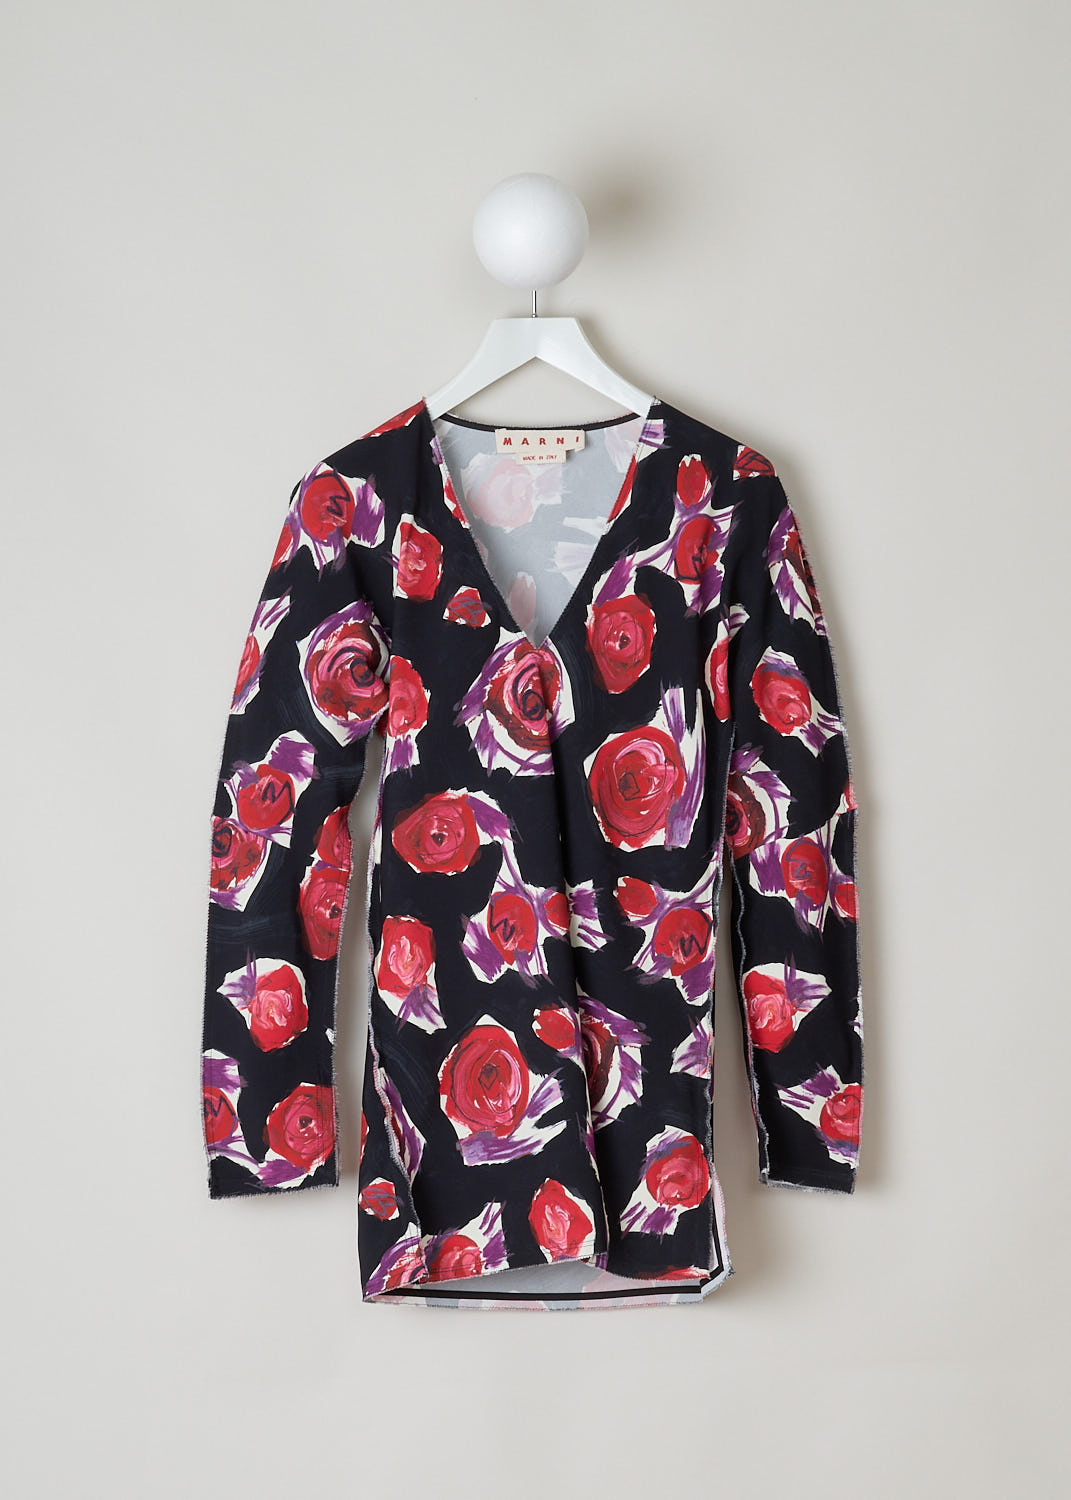 MARNI, ROSE PRINTED LONG SLEEVE TOP, CAMA0486A0_UTV908_SRN99, Print, Front, This long sleeve top has a rose print. The top features a V-neckline, small slits on the sleeves and on either side. The top has a raw hemline throughout.
